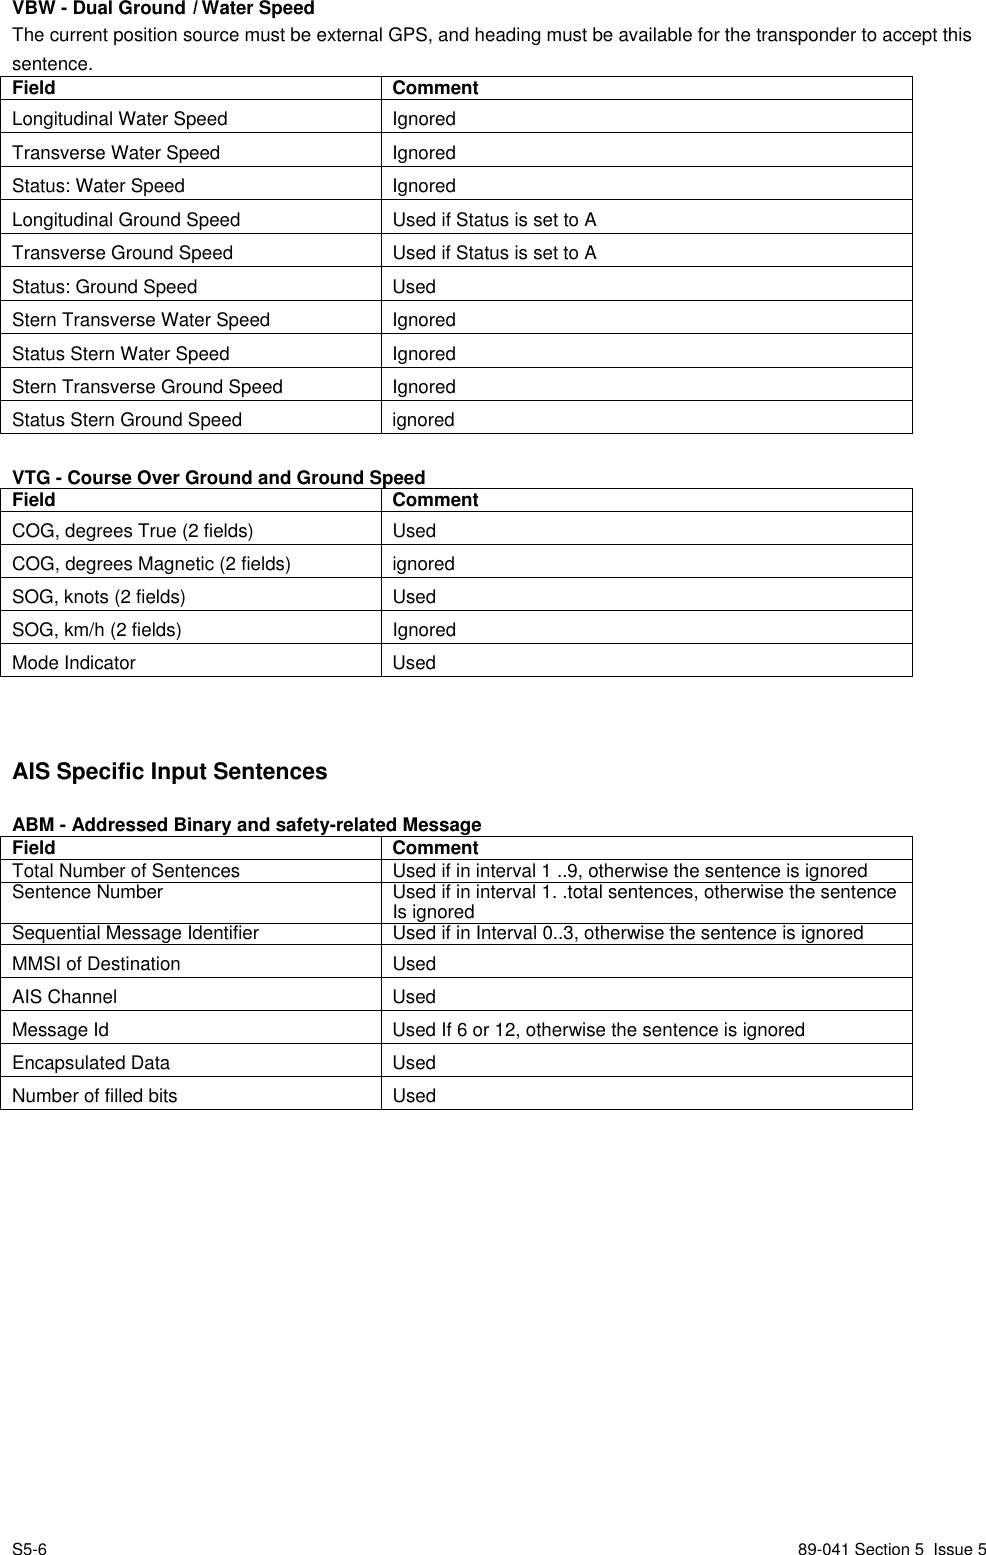 S5-6 89-041 Section 5  Issue 5VBW - Dual Ground I Water SpeedThe current position source must be external GPS, and heading must be available for the transponder to accept thissentence.Field CommentLongitudinal Water Speed IgnoredTransverse Water Speed IgnoredStatus: Water Speed IgnoredLongitudinal Ground Speed Used if Status is set to ATransverse Ground Speed Used if Status is set to AStatus: Ground Speed UsedStern Transverse Water Speed IgnoredStatus Stern Water Speed IgnoredStern Transverse Ground Speed IgnoredStatus Stern Ground Speed ignoredVTG - Course Over Ground and Ground SpeedField CommentCOG, degrees True (2 fields) UsedCOG, degrees Magnetic (2 fields) ignoredSOG, knots (2 fields) UsedSOG, km/h (2 fields) IgnoredMode Indicator UsedAIS Specific Input SentencesABM - Addressed Binary and safety-related MessageField CommentTotal Number of Sentences Used if in interval 1 ..9, otherwise the sentence is ignoredSentence Number Used if in interval 1. .total sentences, otherwise the sentenceIs ignoredSequential Message Identifier Used if in Interval 0..3, otherwise the sentence is ignoredMMSI of Destination UsedAIS Channel UsedMessage Id Used If 6 or 12, otherwise the sentence is ignoredEncapsulated Data UsedNumber of filled bits Used